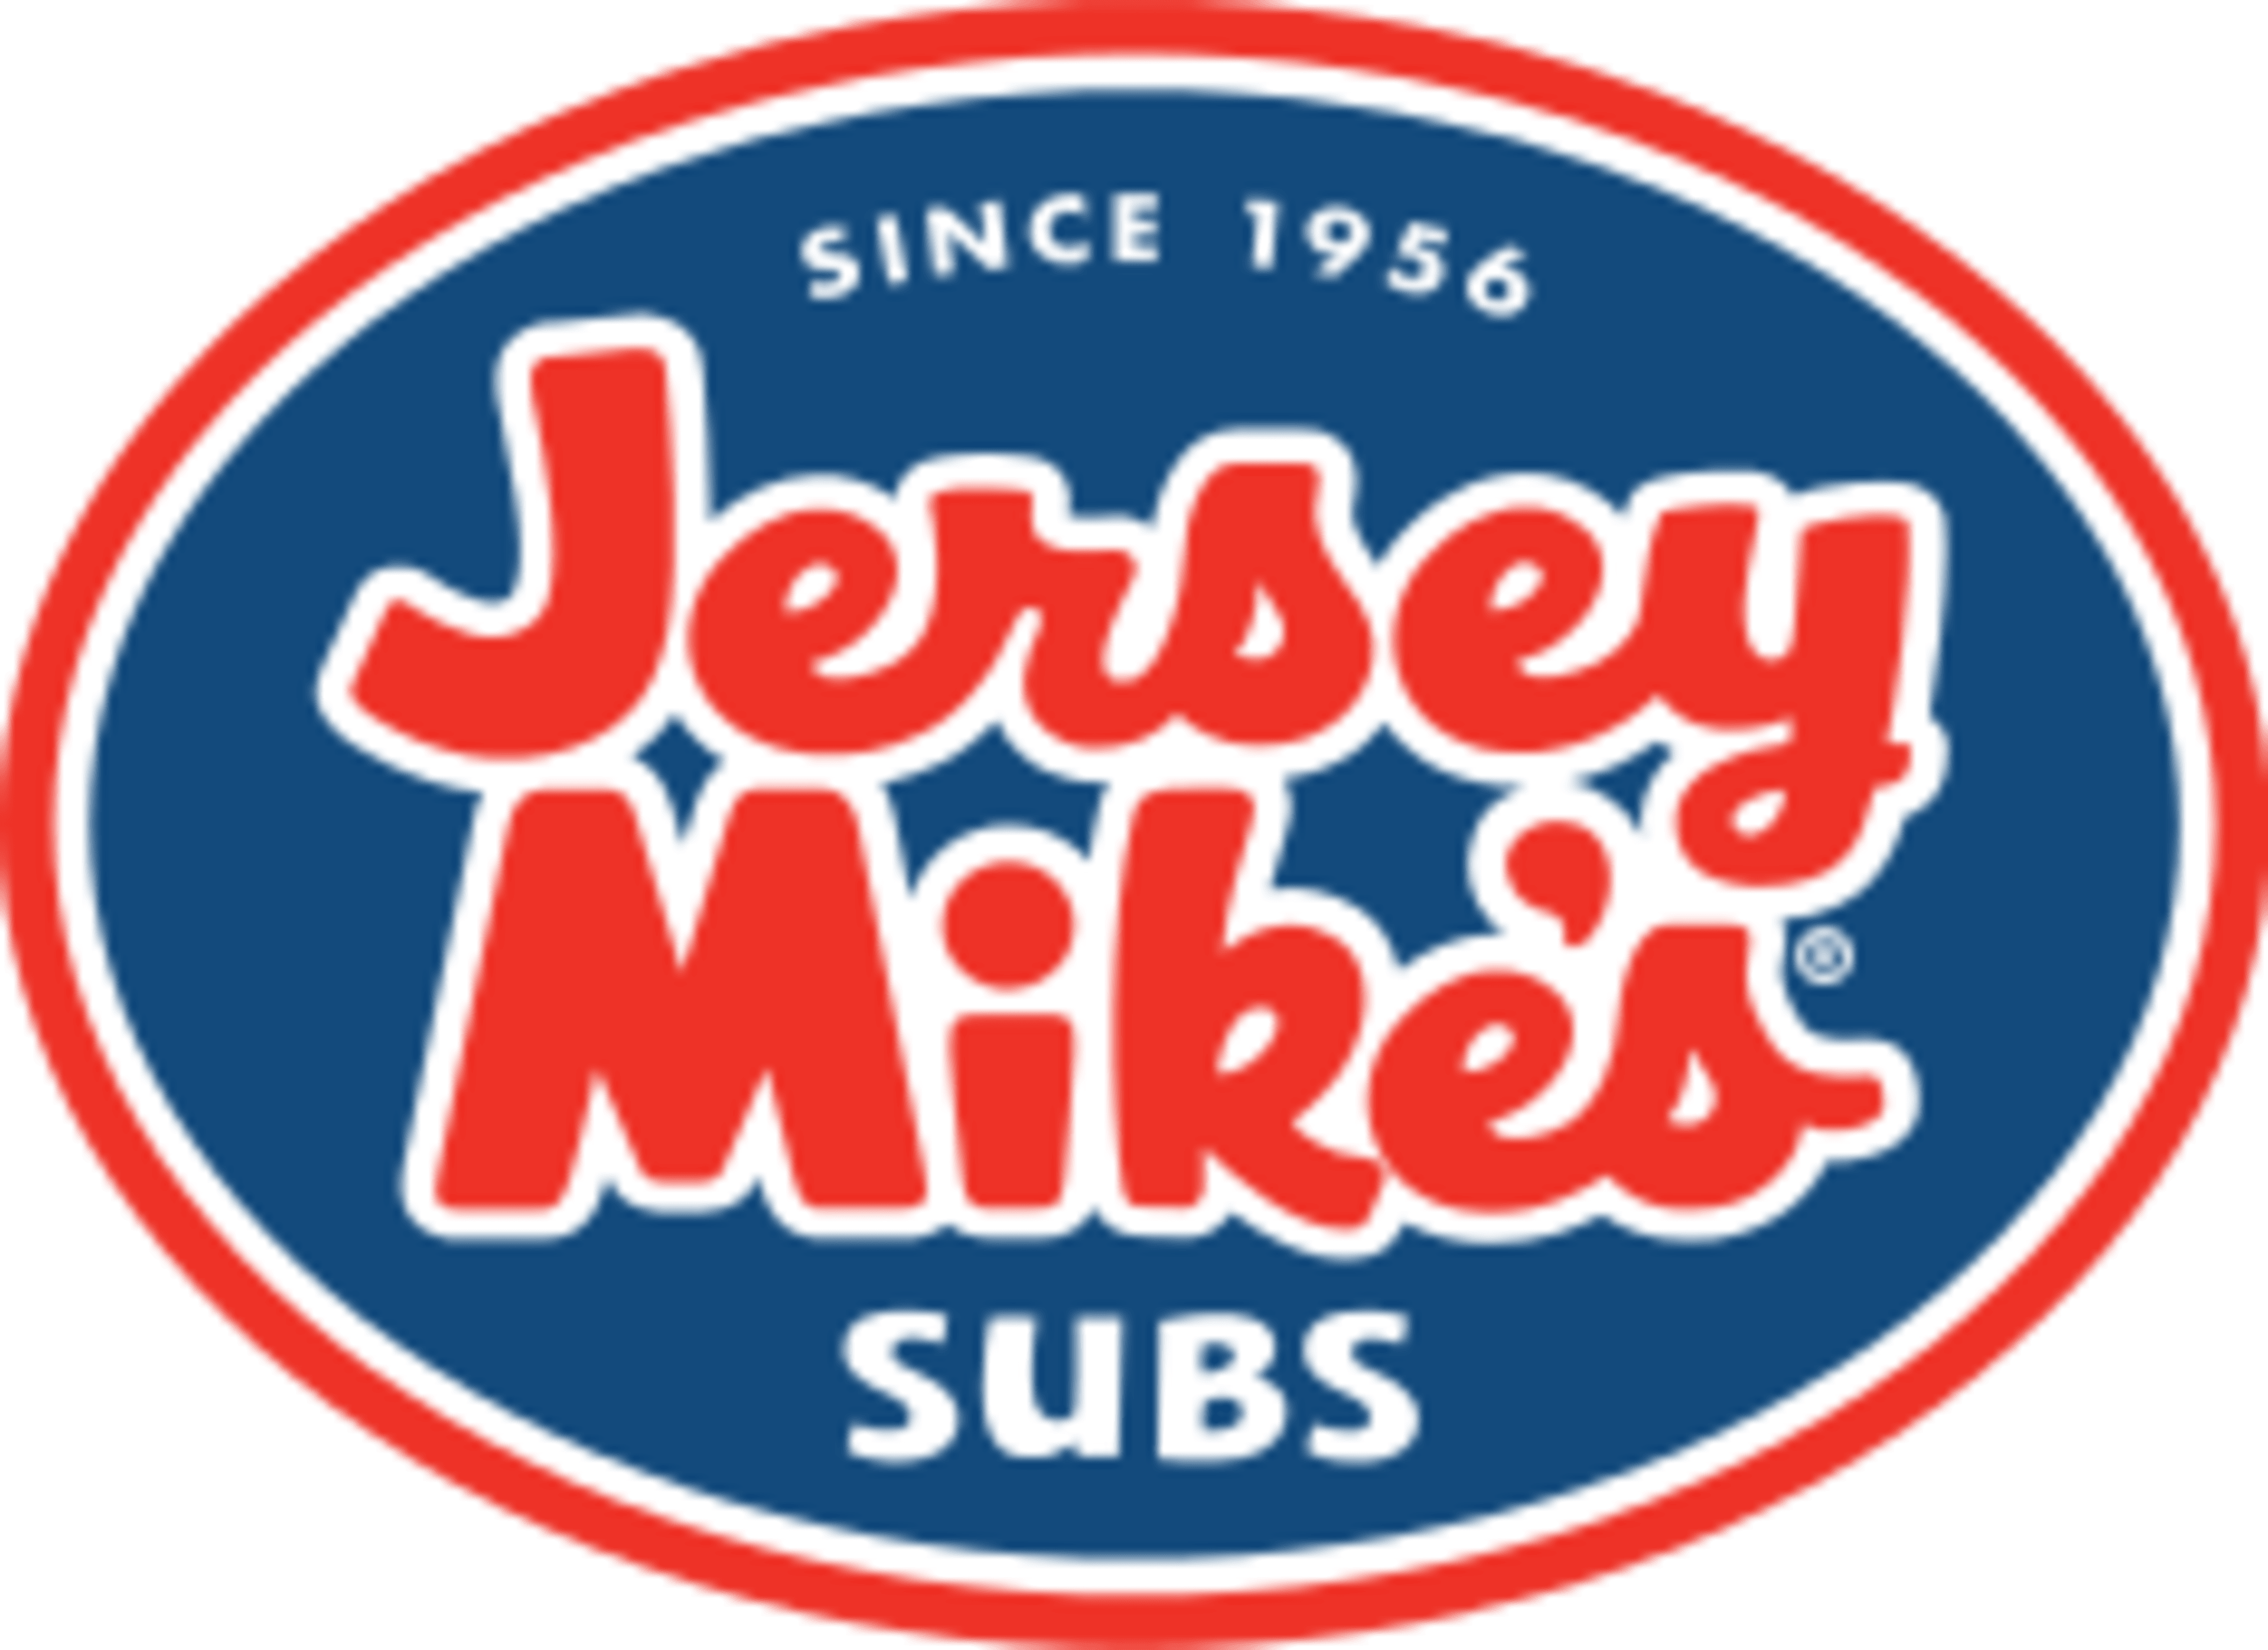 Jersey Mike's SubsCode